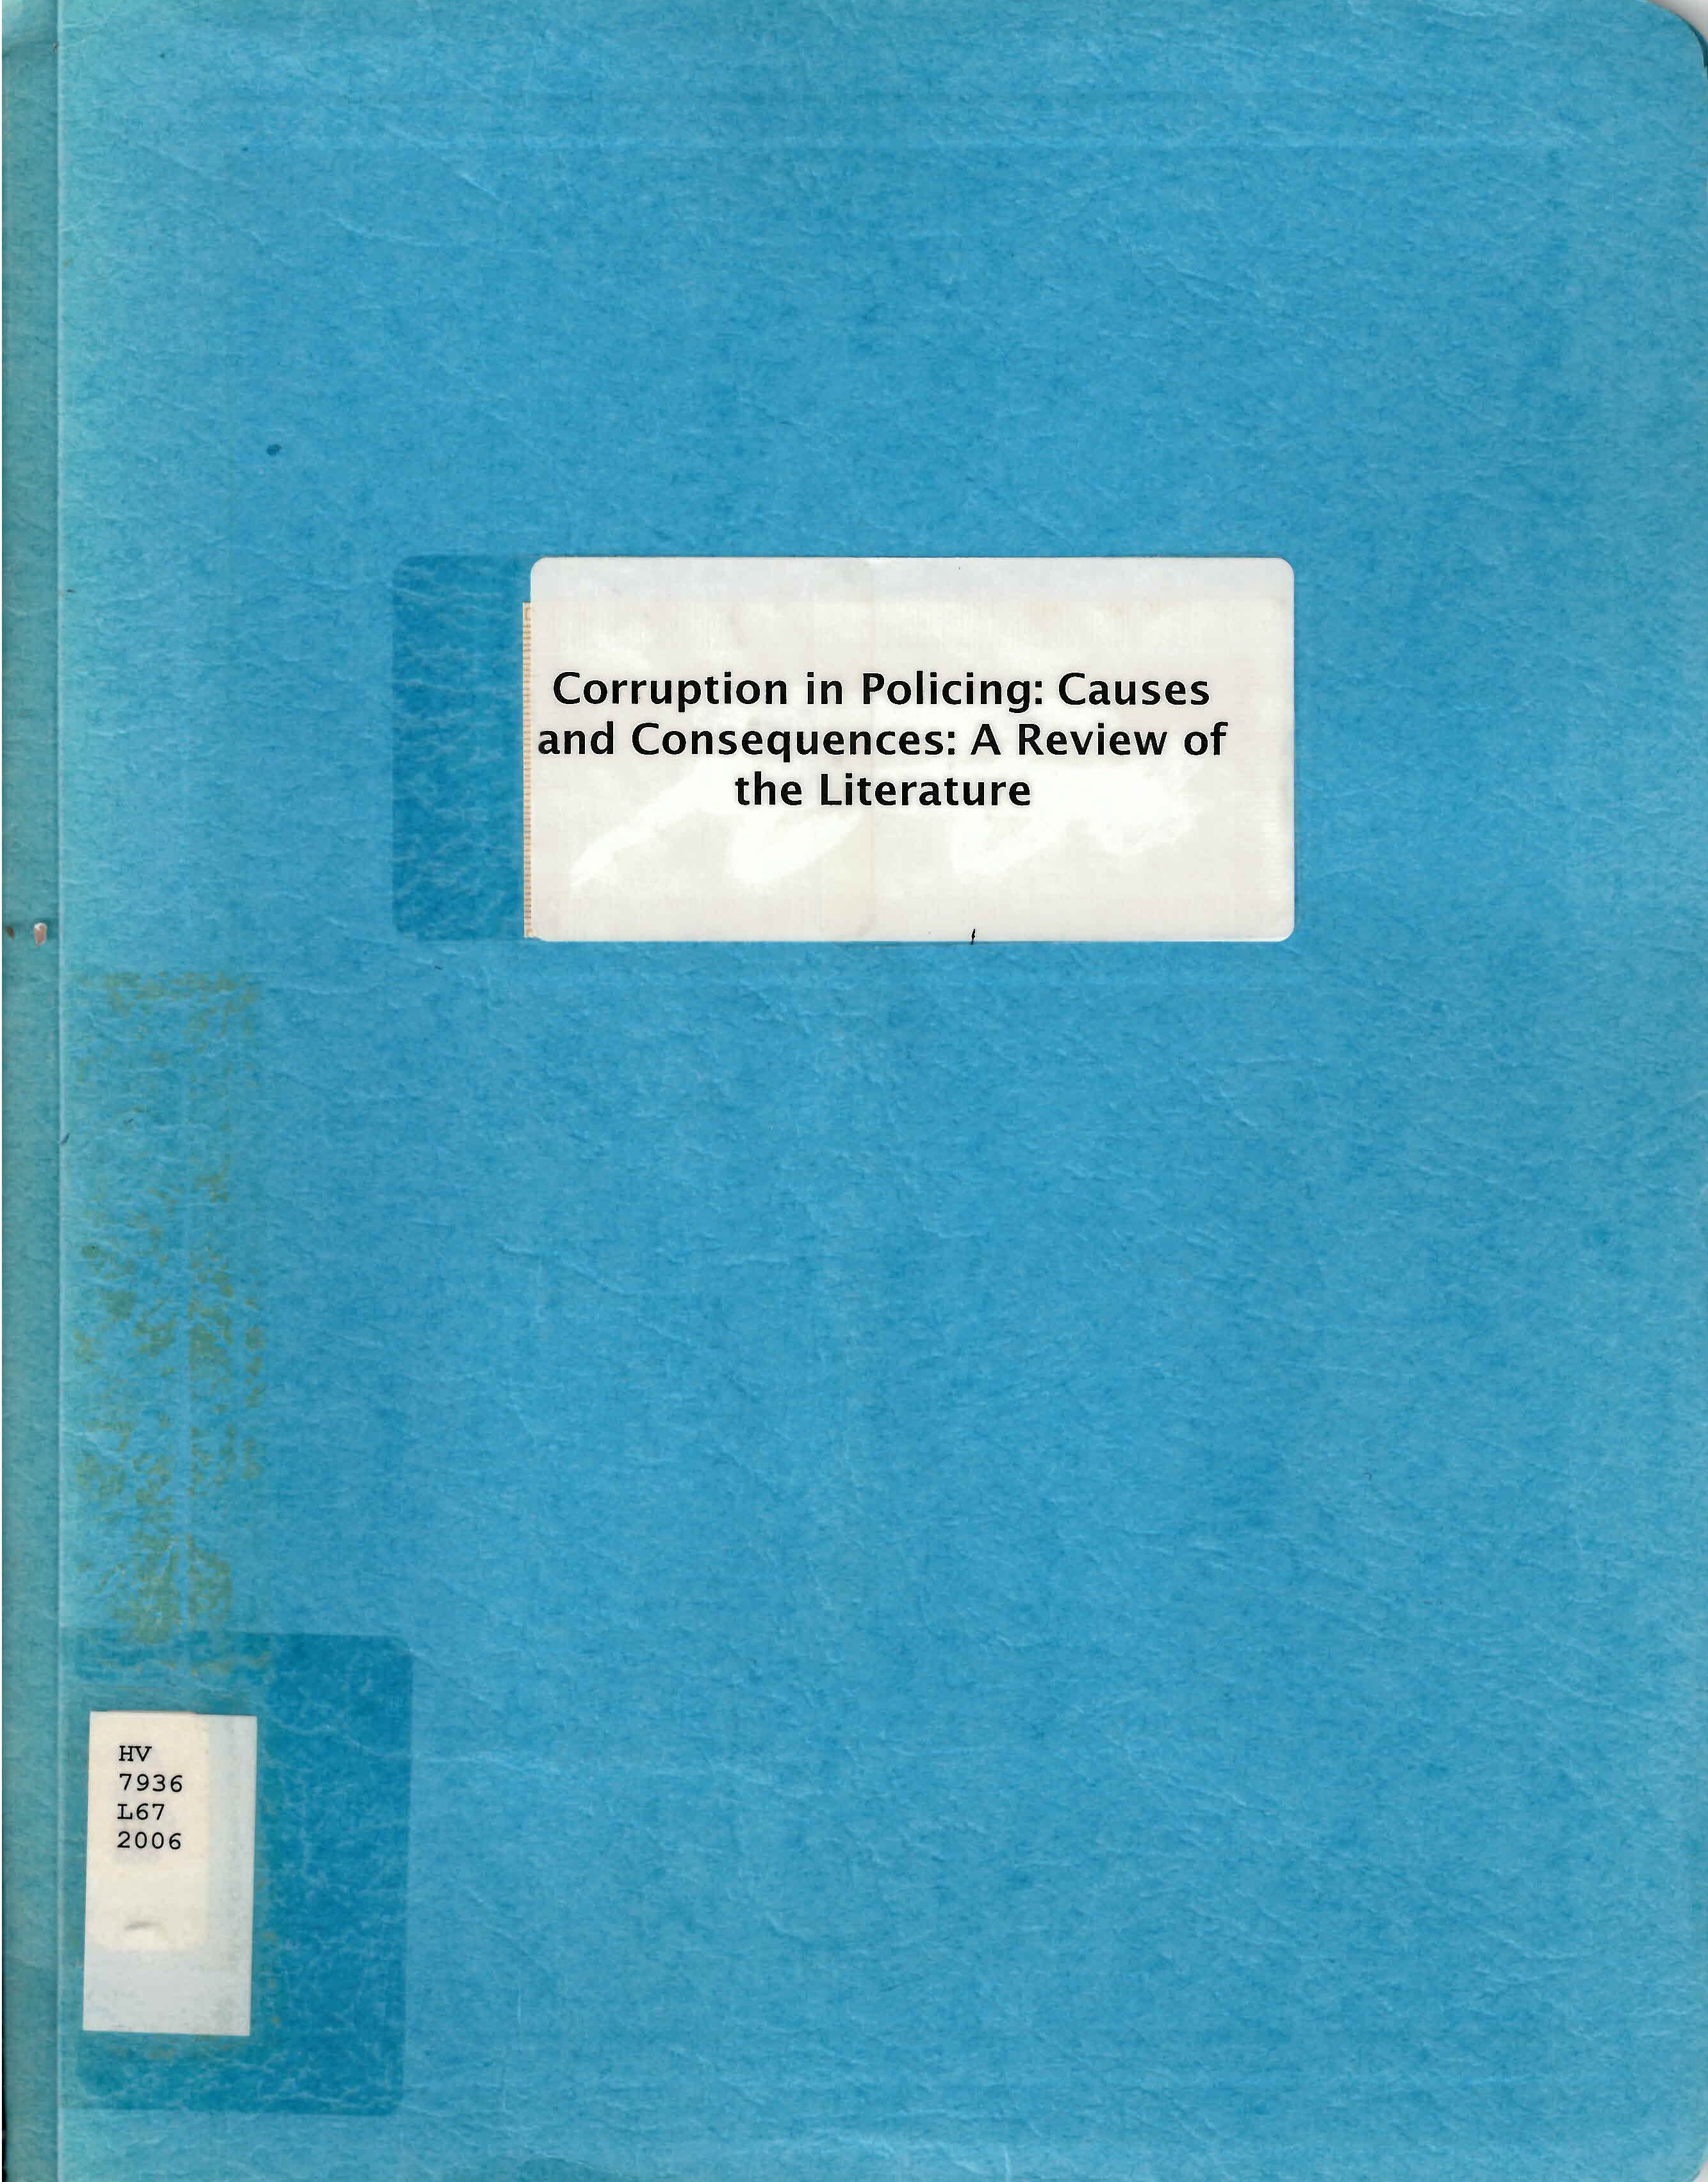 Corruption in policing : causes and consequences : a review of the literature